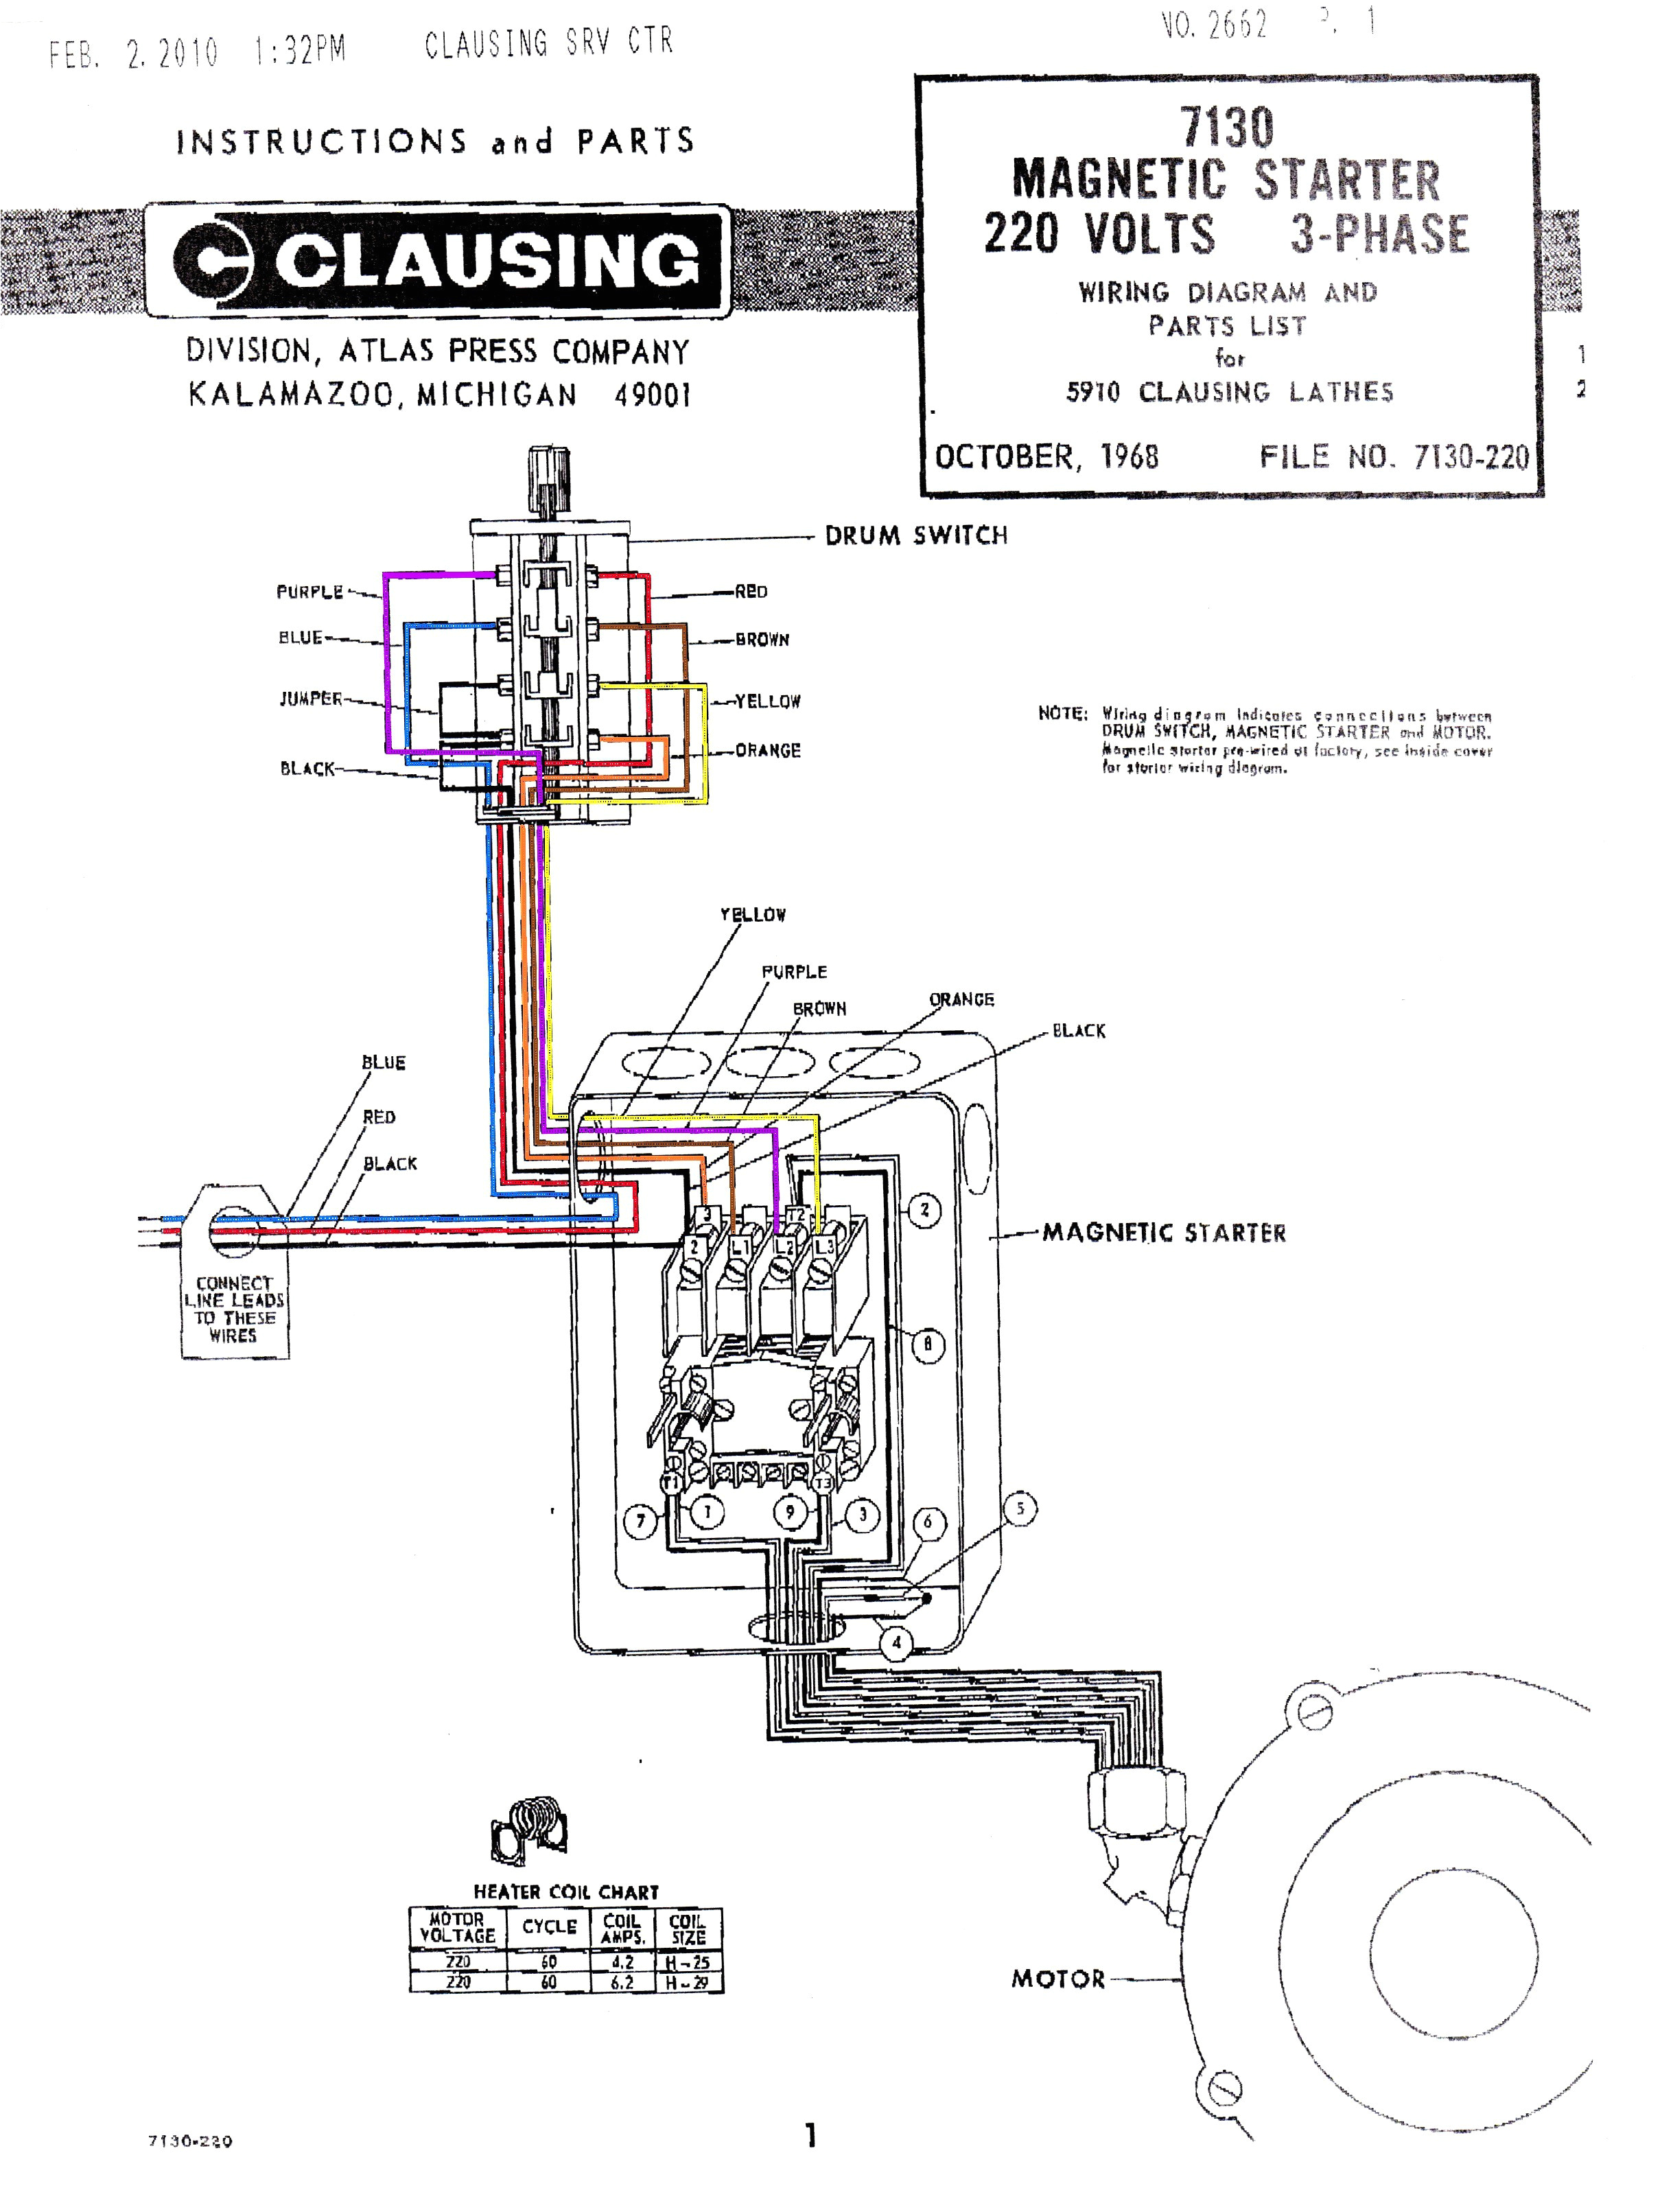 sqd wiring diagrams wiring diagram post 2601ag2 wiring schematic source square d